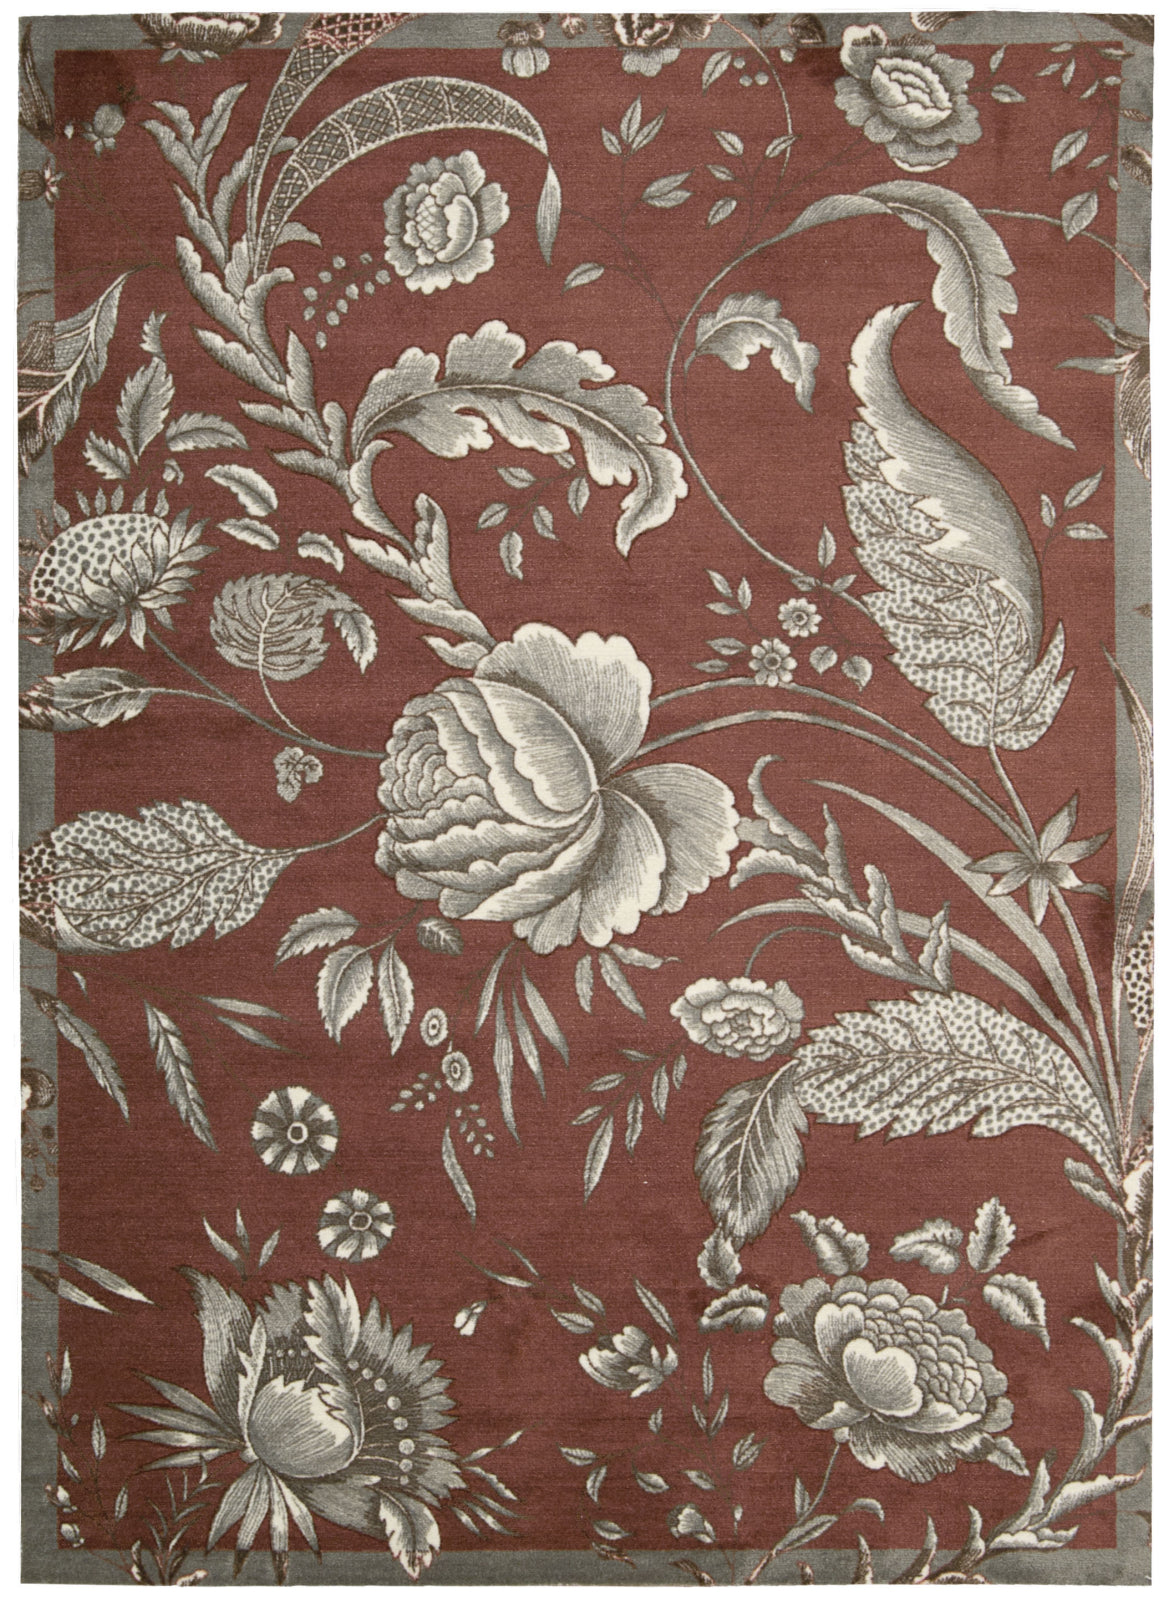 Nourison Artisanal Delight WAD07 Fanciful Russet Area Rug by Waverly main image